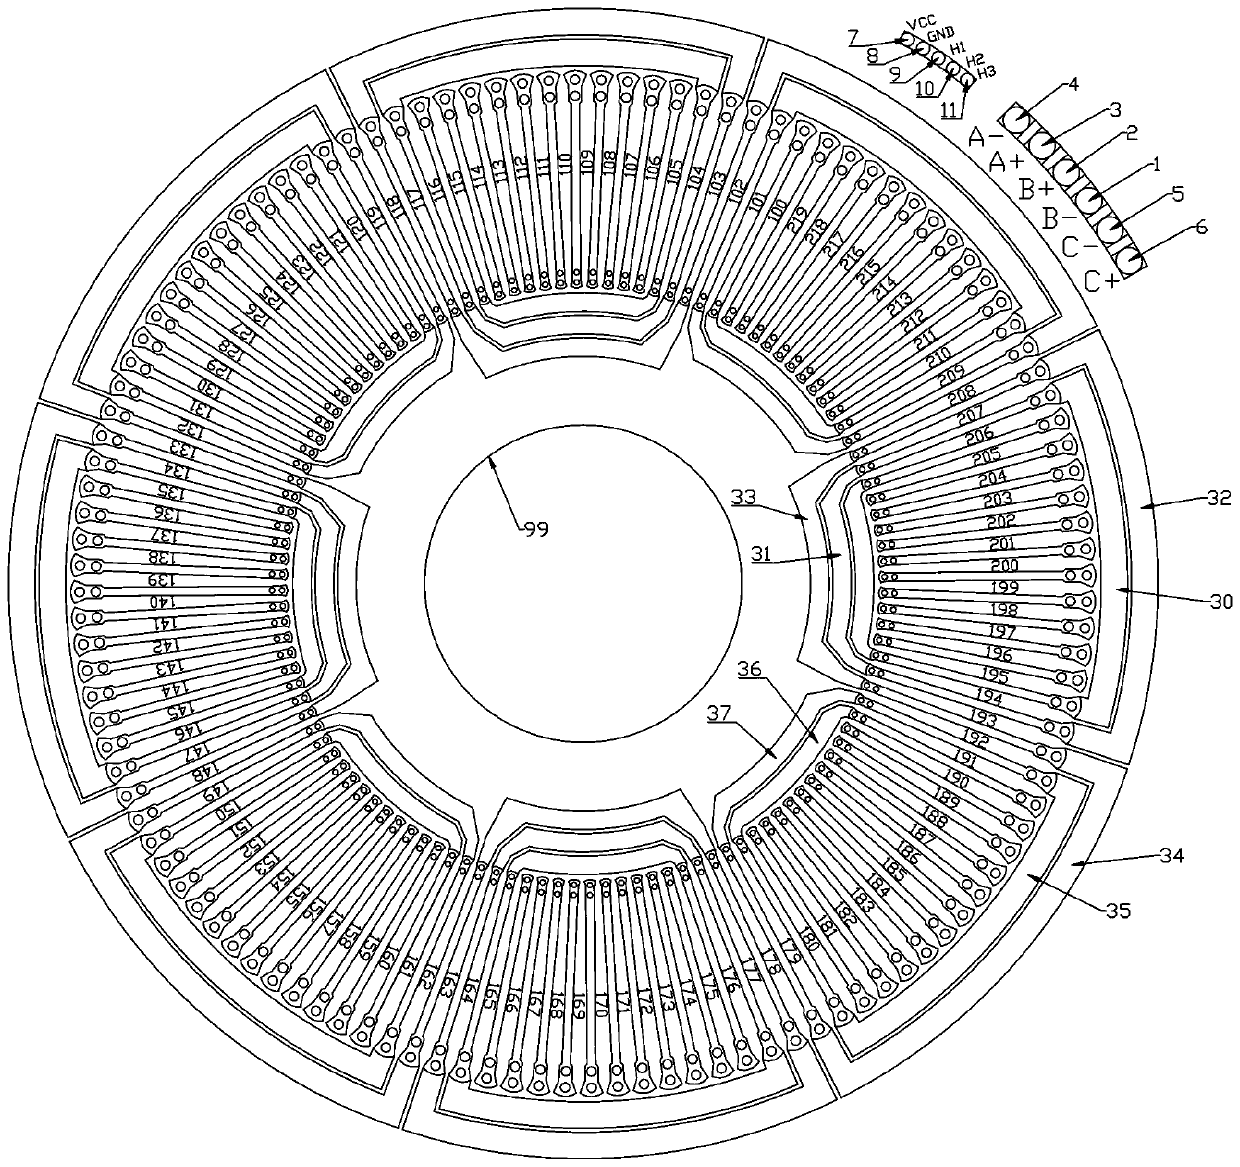 Stator structure based on disc type permanent-magnetism motor winding